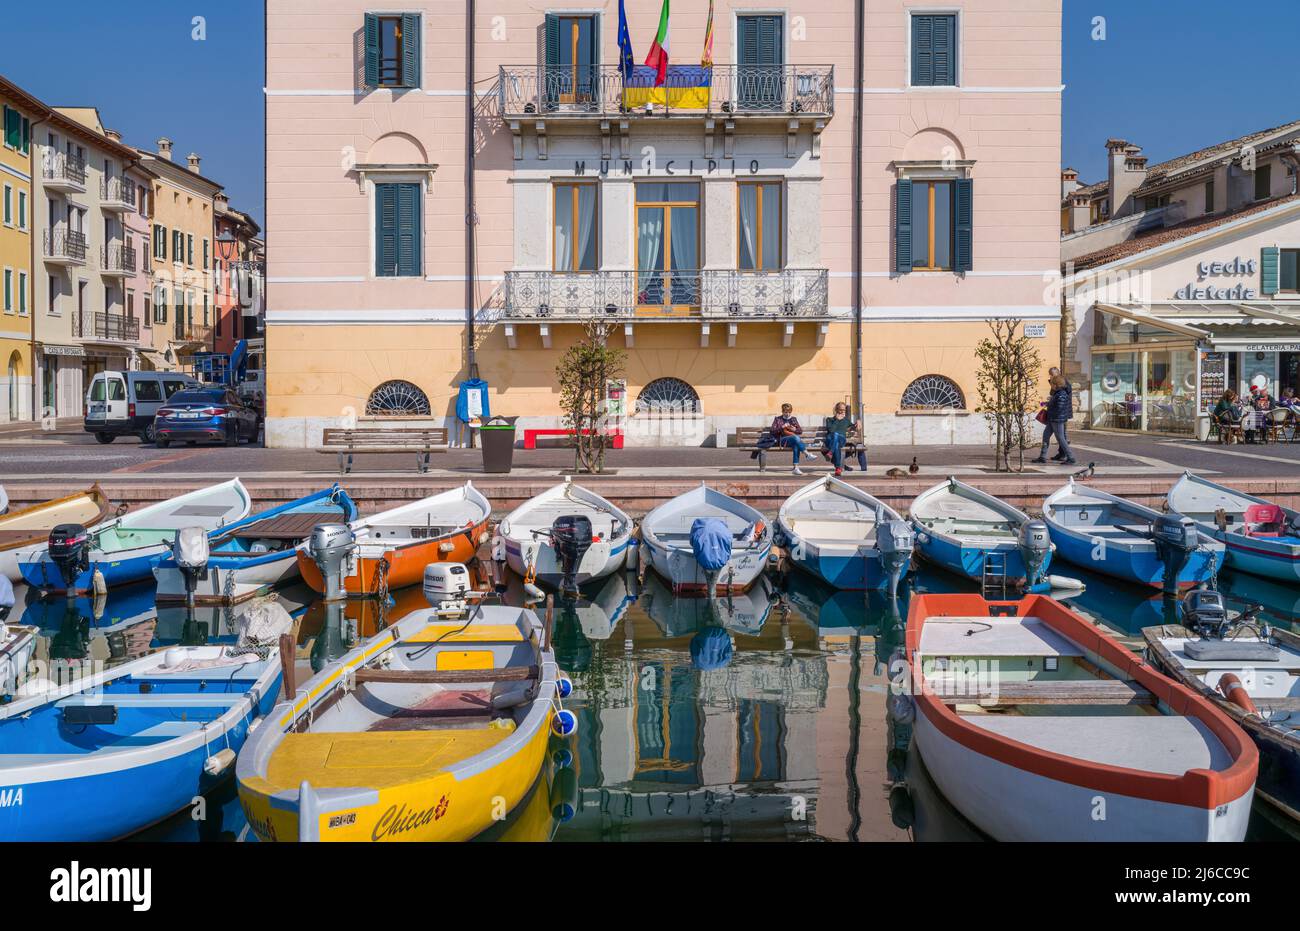 Bardolino, Italy - March 10, 2022:  Boats in the old harbor with the city Hall and restaurants in the backgraund Stock Photo